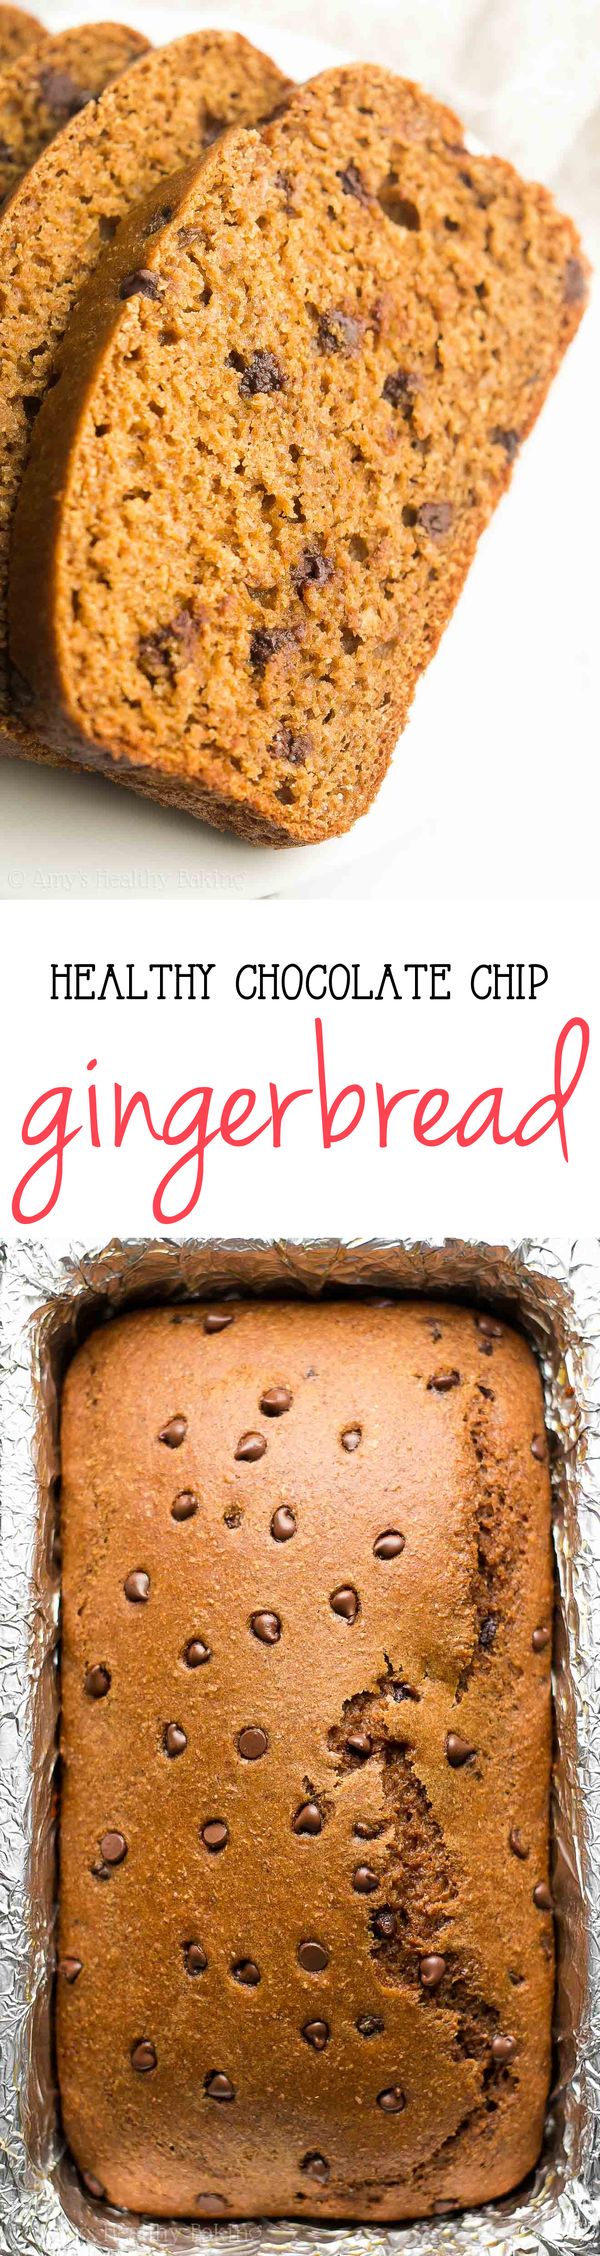 Healthy Chocolate Chip Gingerbread